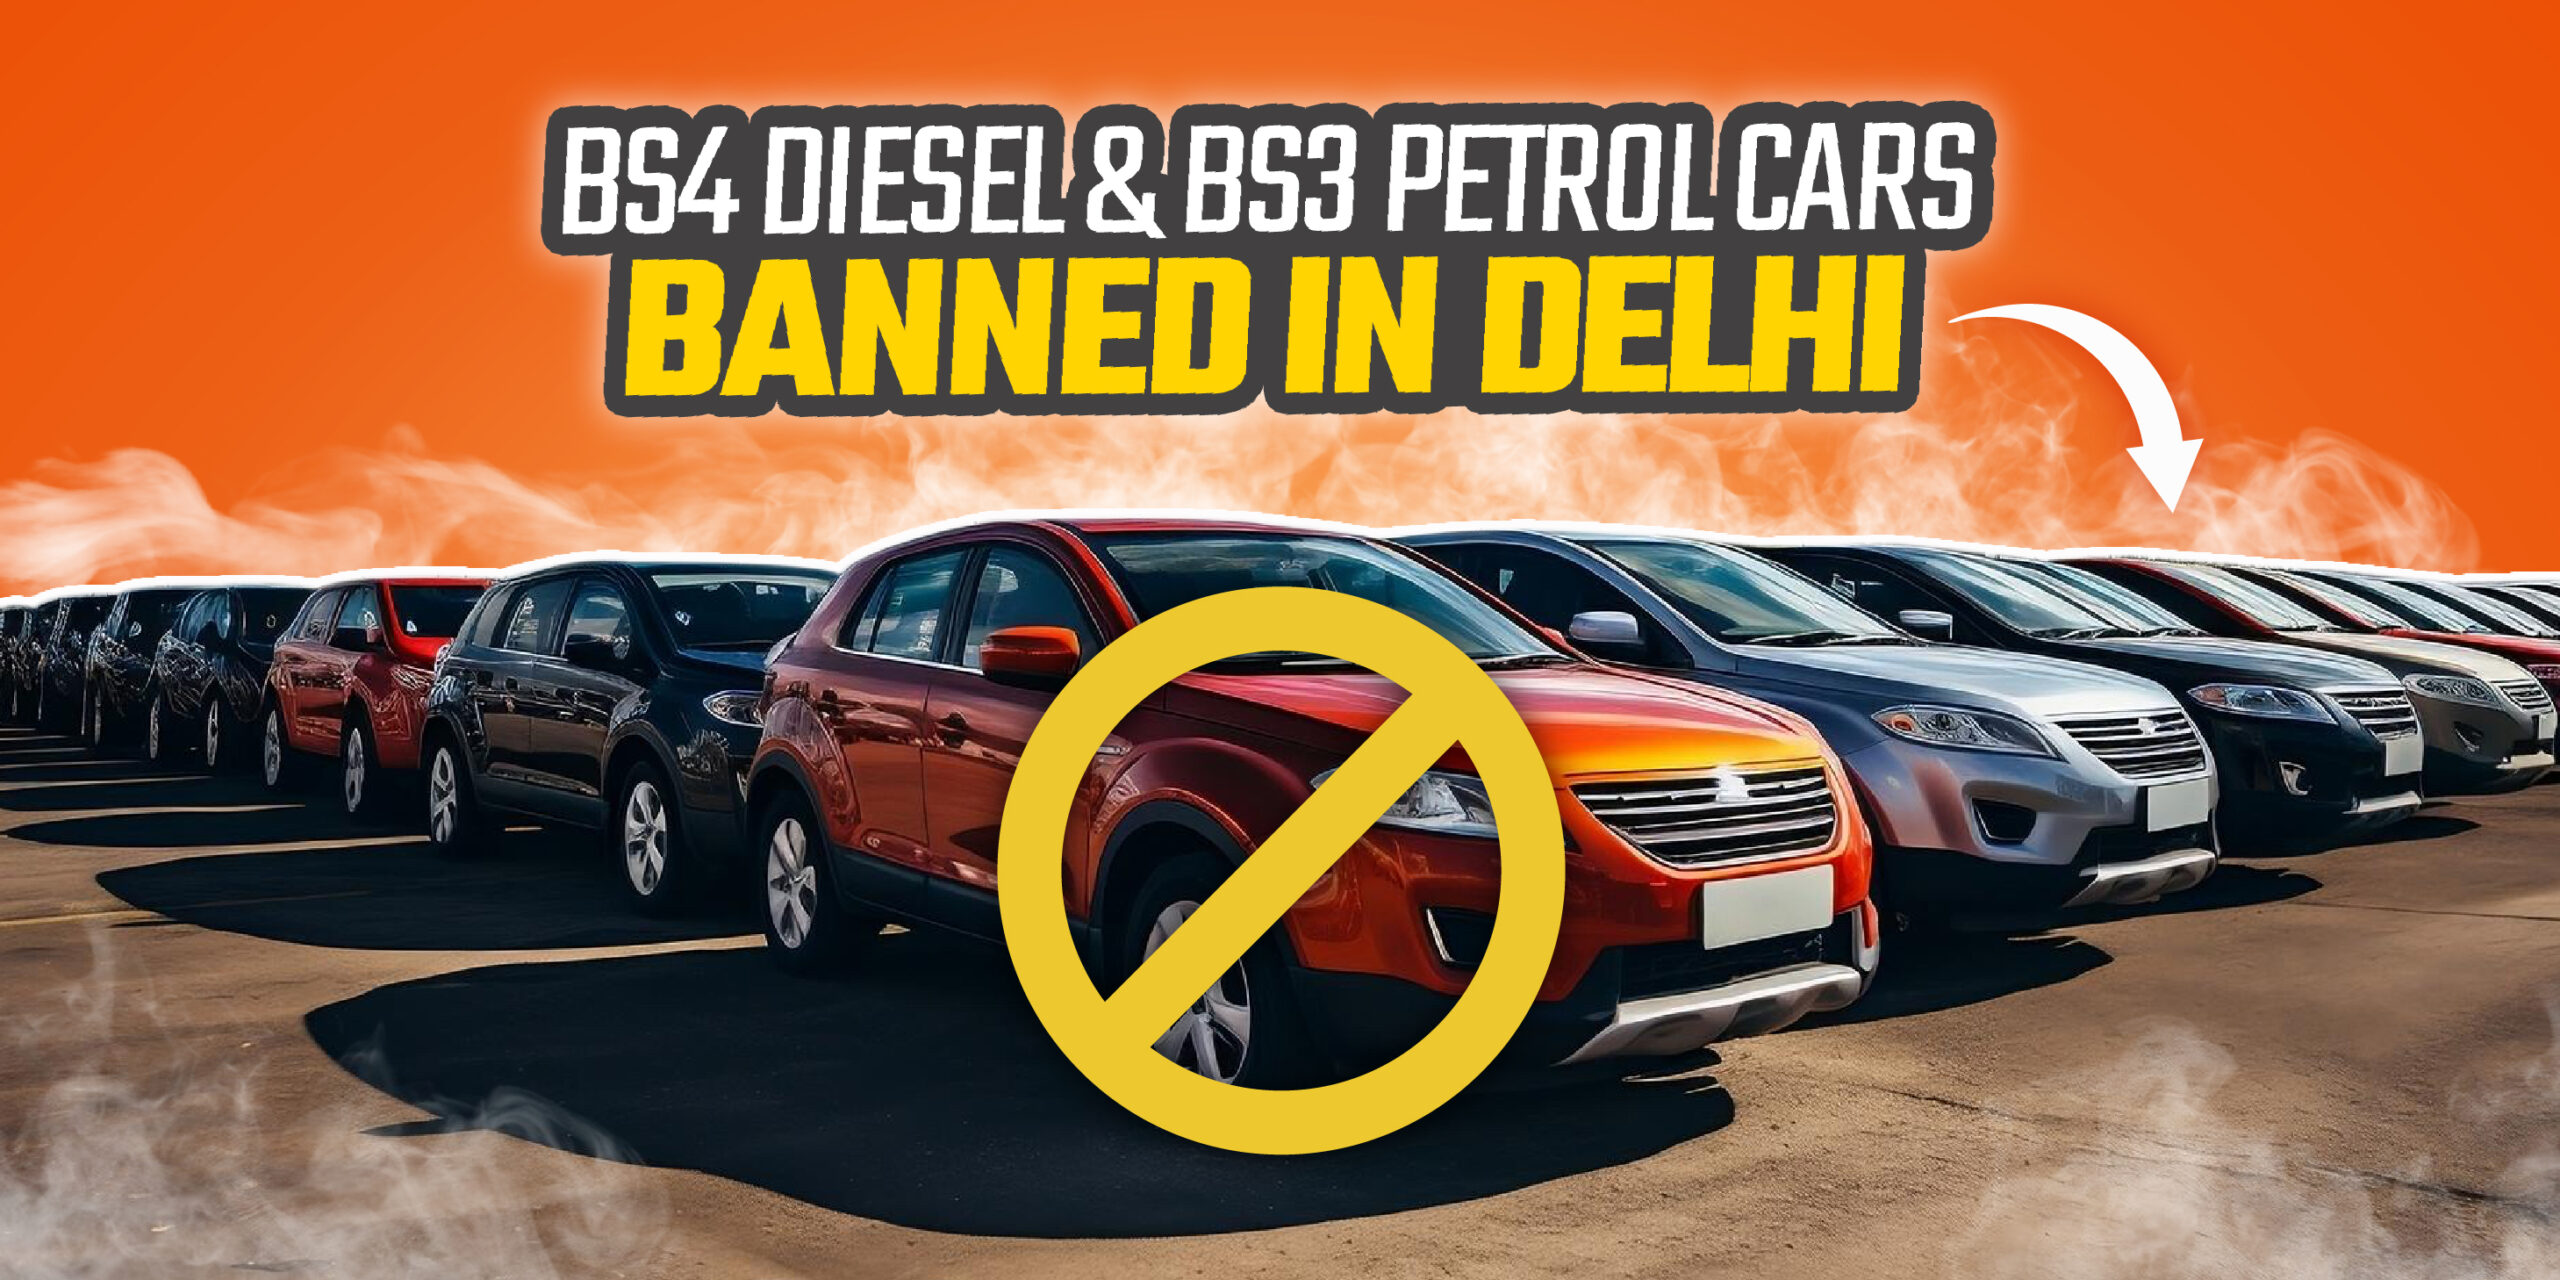 BS4 diesel cars and BS3 petrol cars banned in Delhi